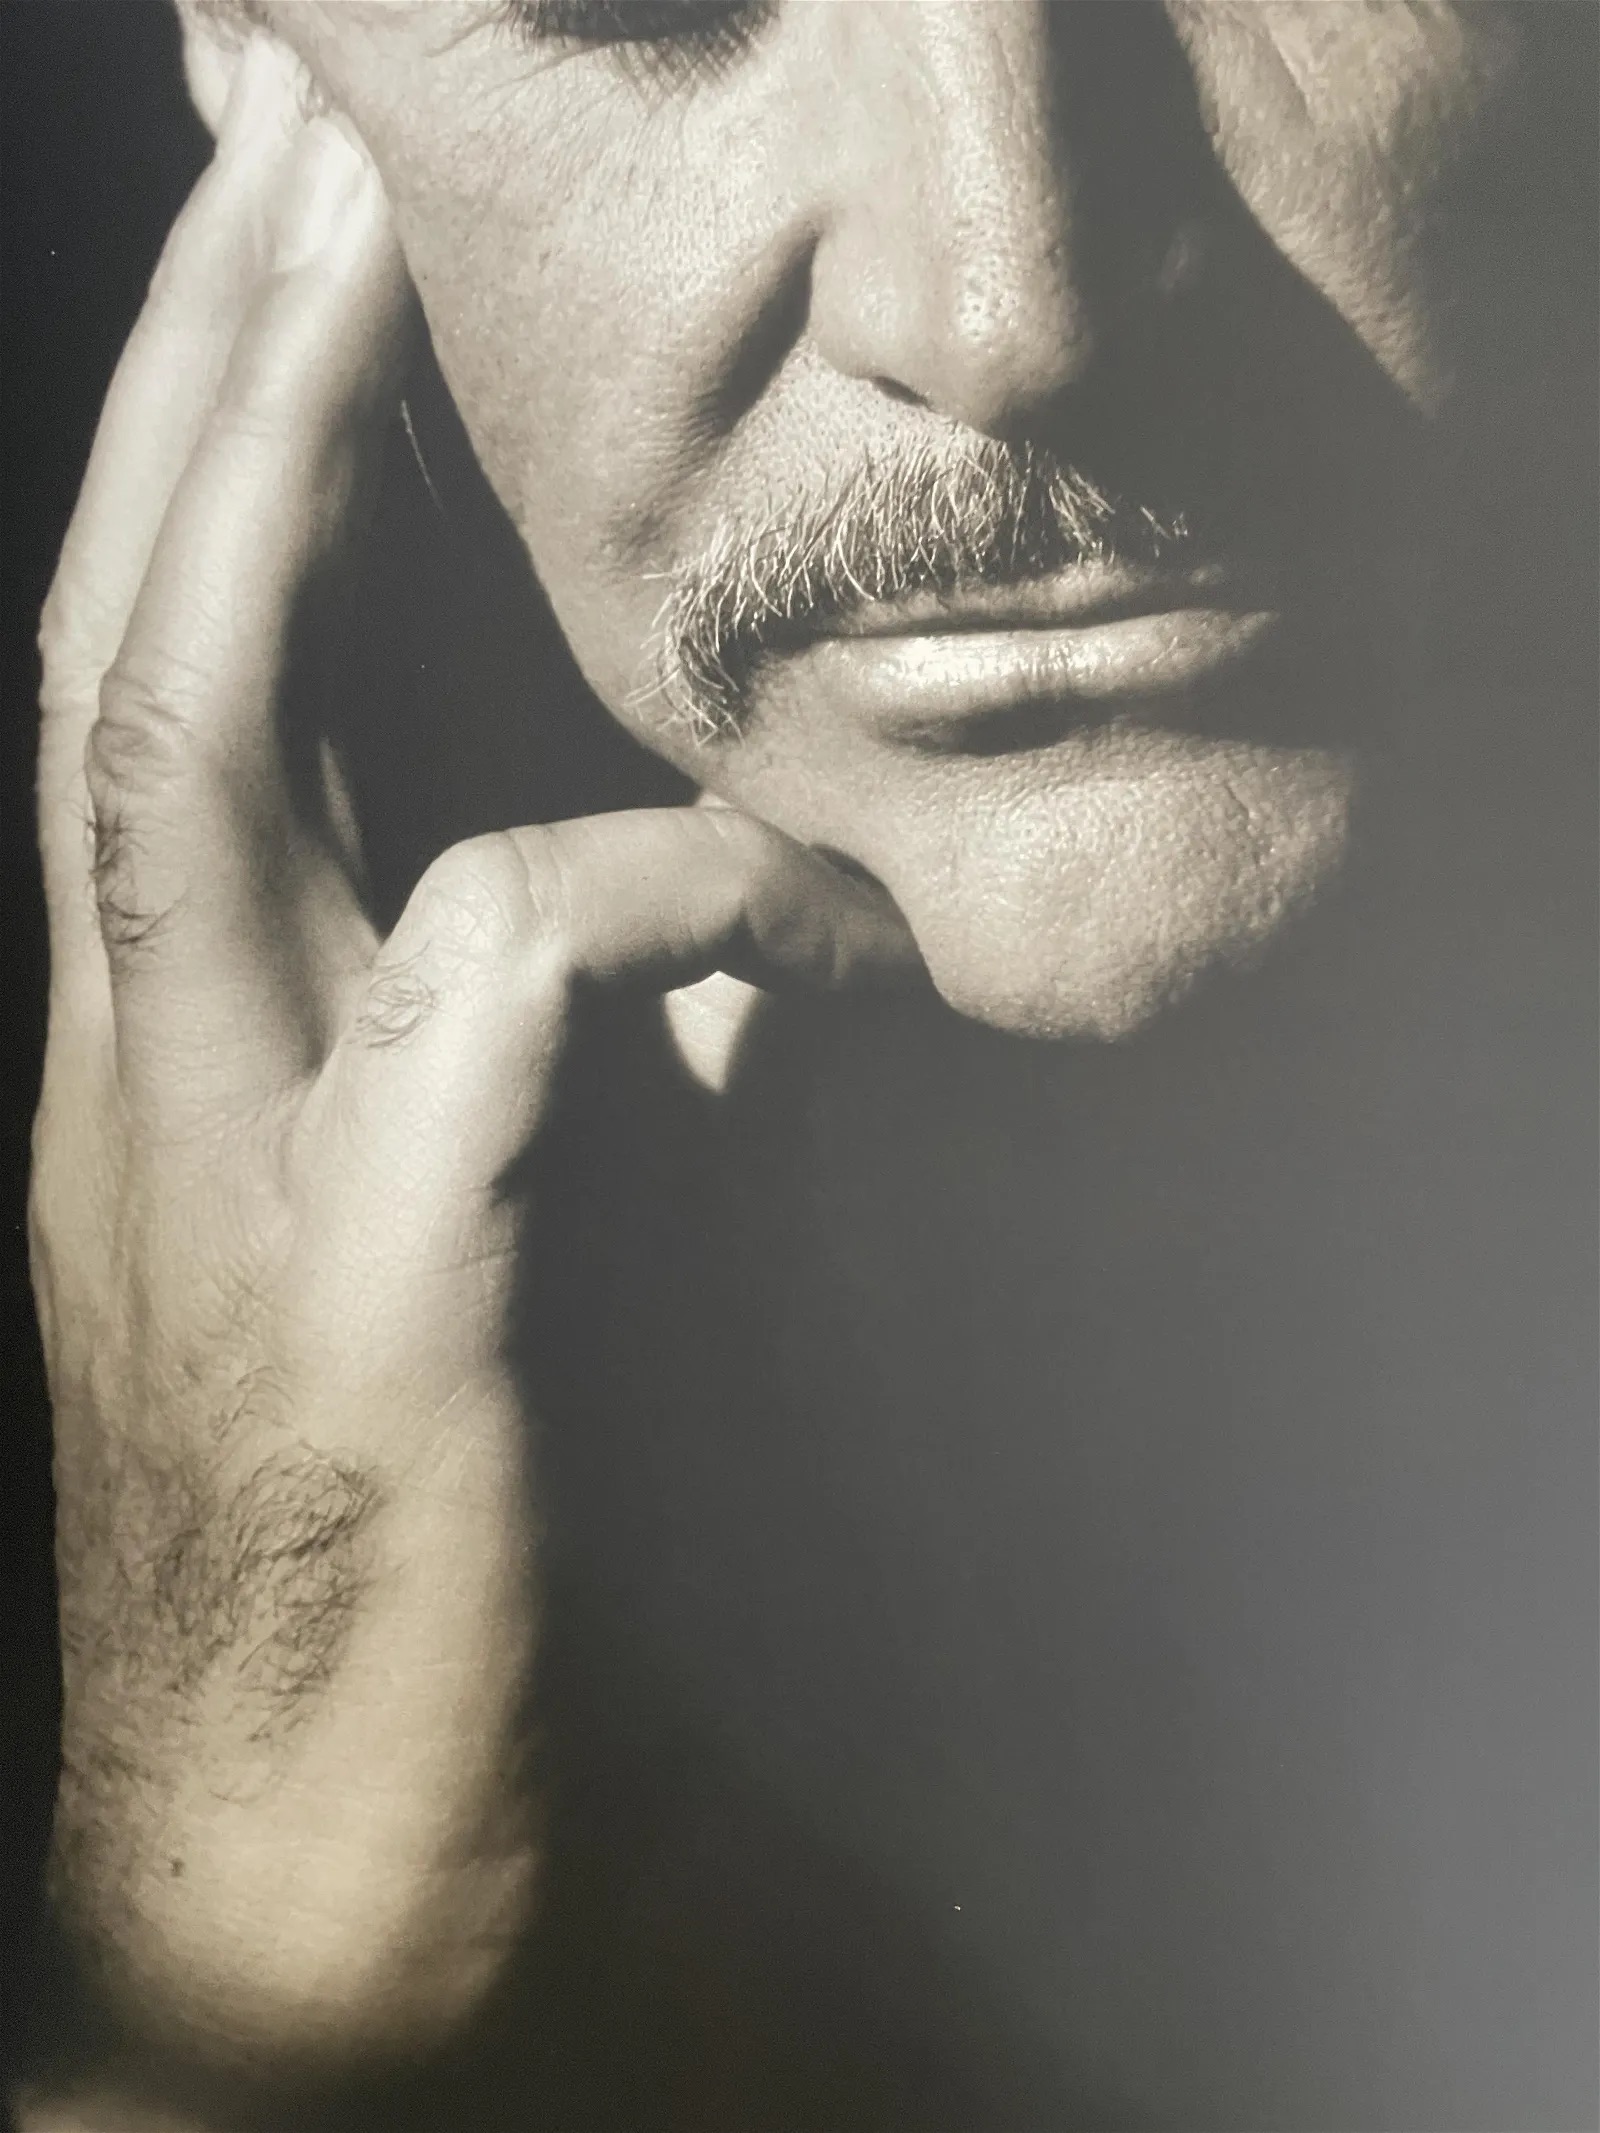 Herb Ritts "Sean Connery, Hollywood, 1989" Print - Image 4 of 6